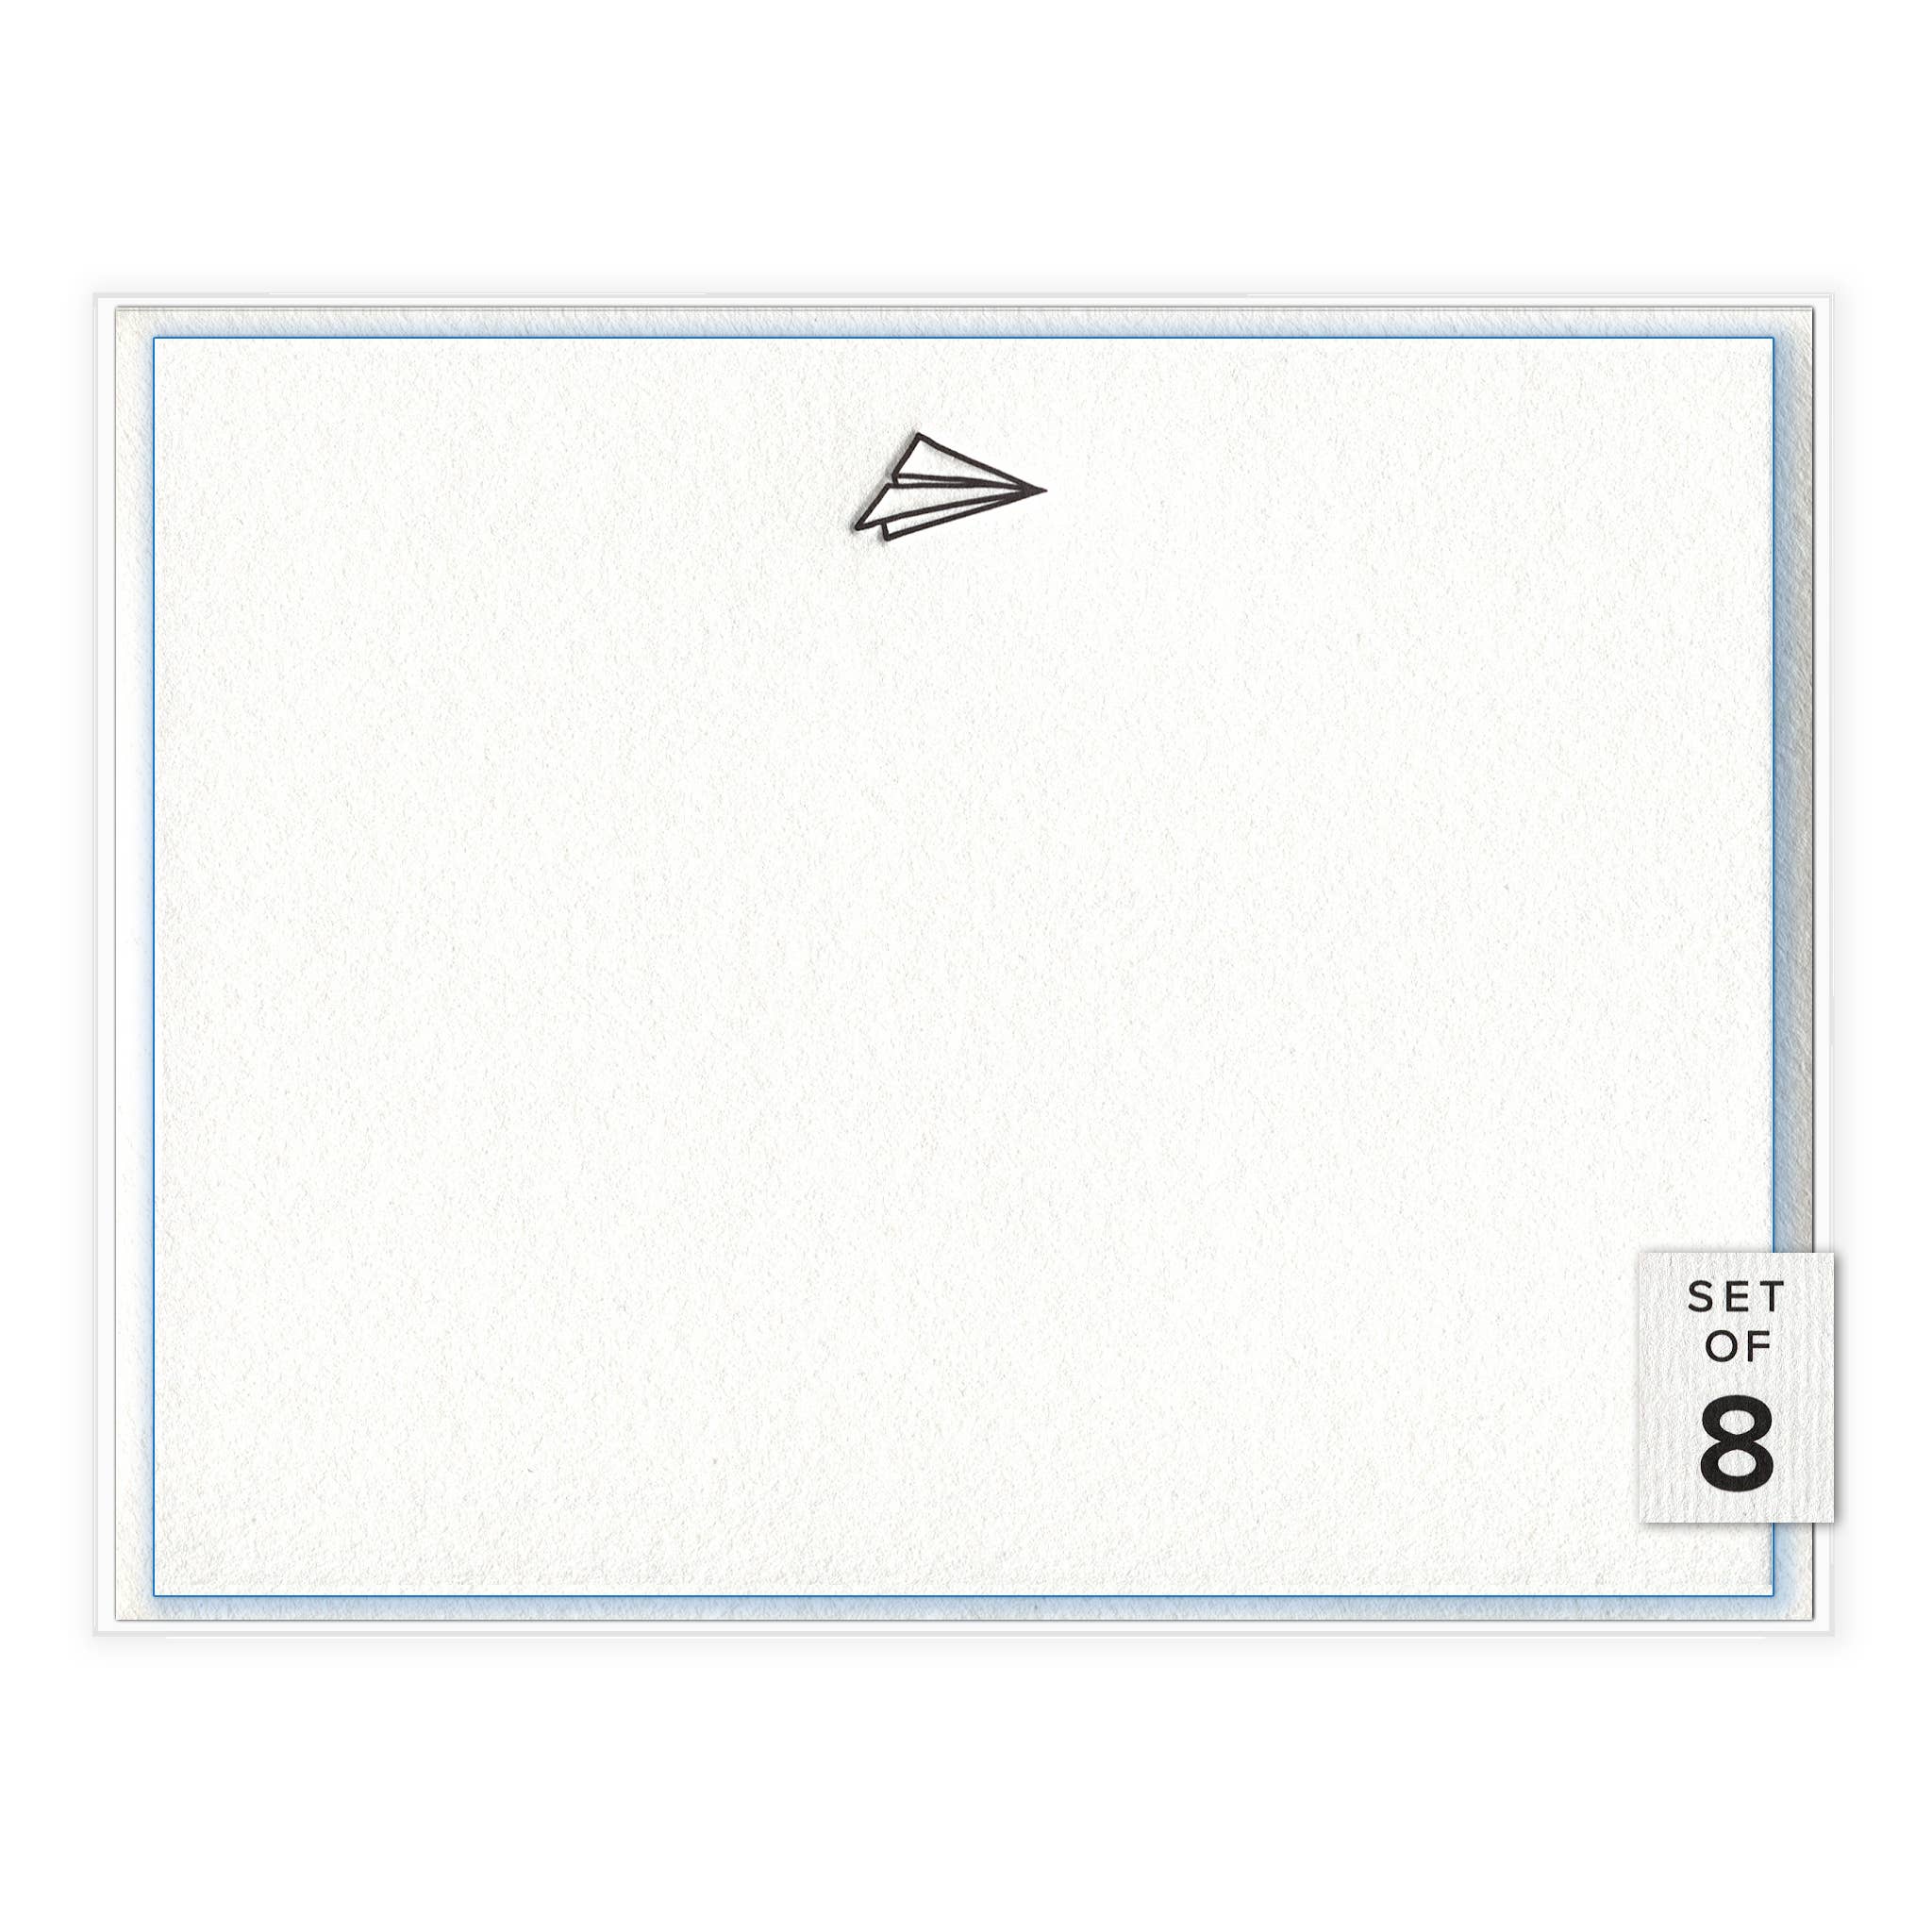 Paper Airplane - social stationery (Boxed Set of Eight)